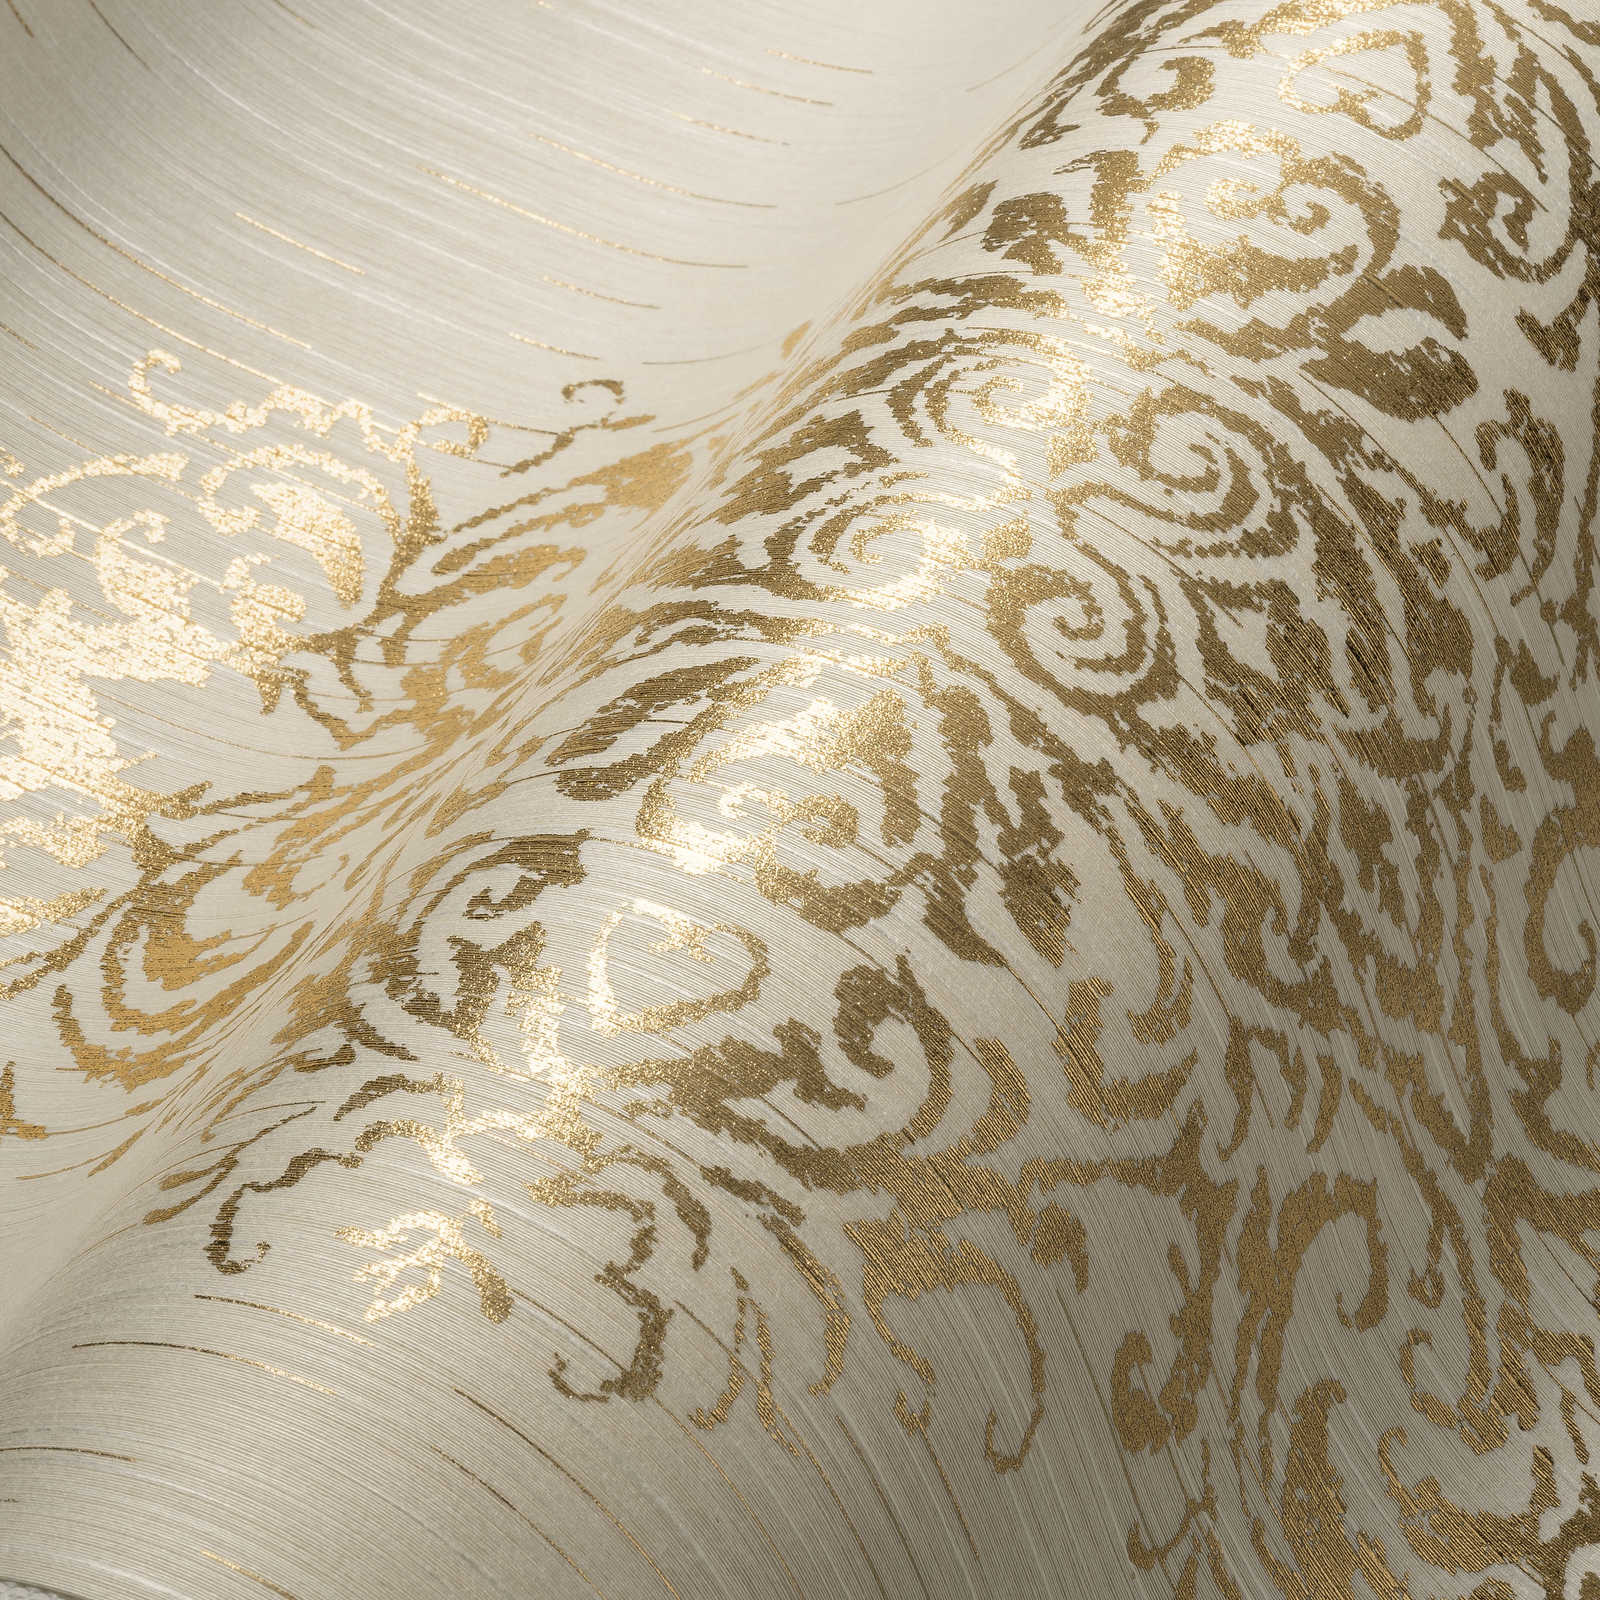             Ornament wallpaper with metallic effect in used look - cream, gold
        